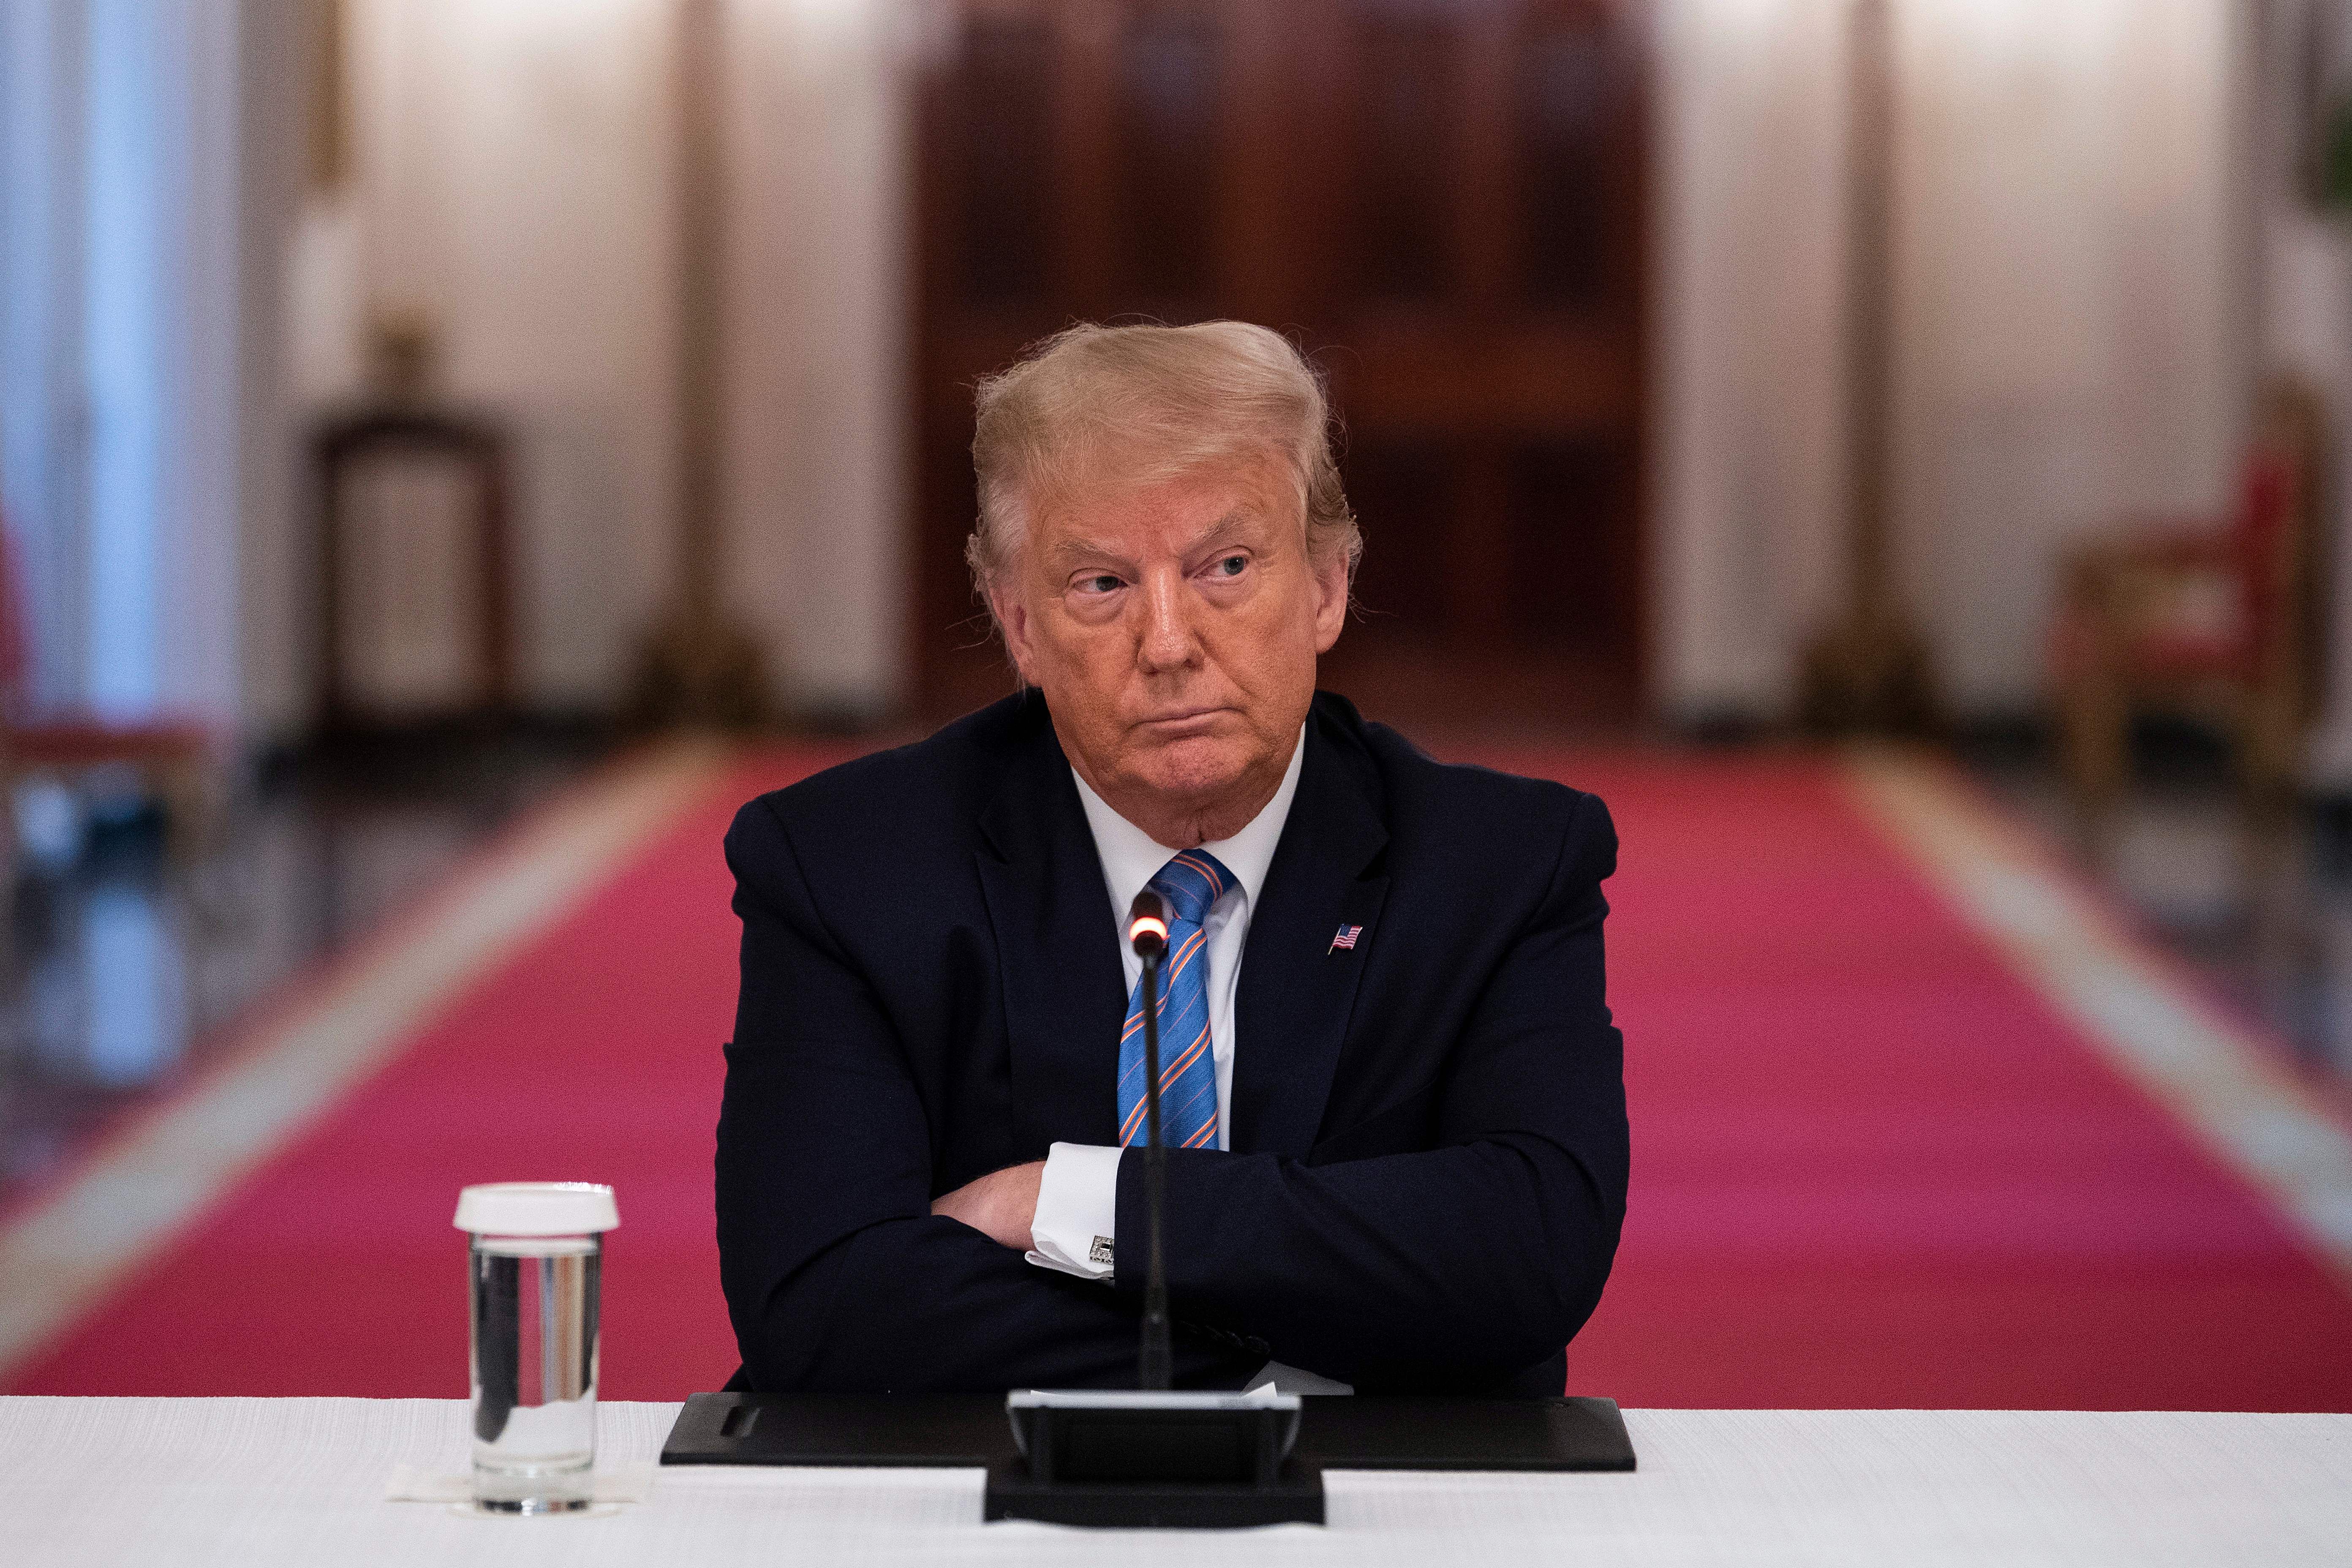  President Donald Trumpduring a roundtable discussion on the Safe Reopening of Americas Schools during the coronavirus pandemic, in the East Room of the White House on July 7, 2020, in Washington, DC.